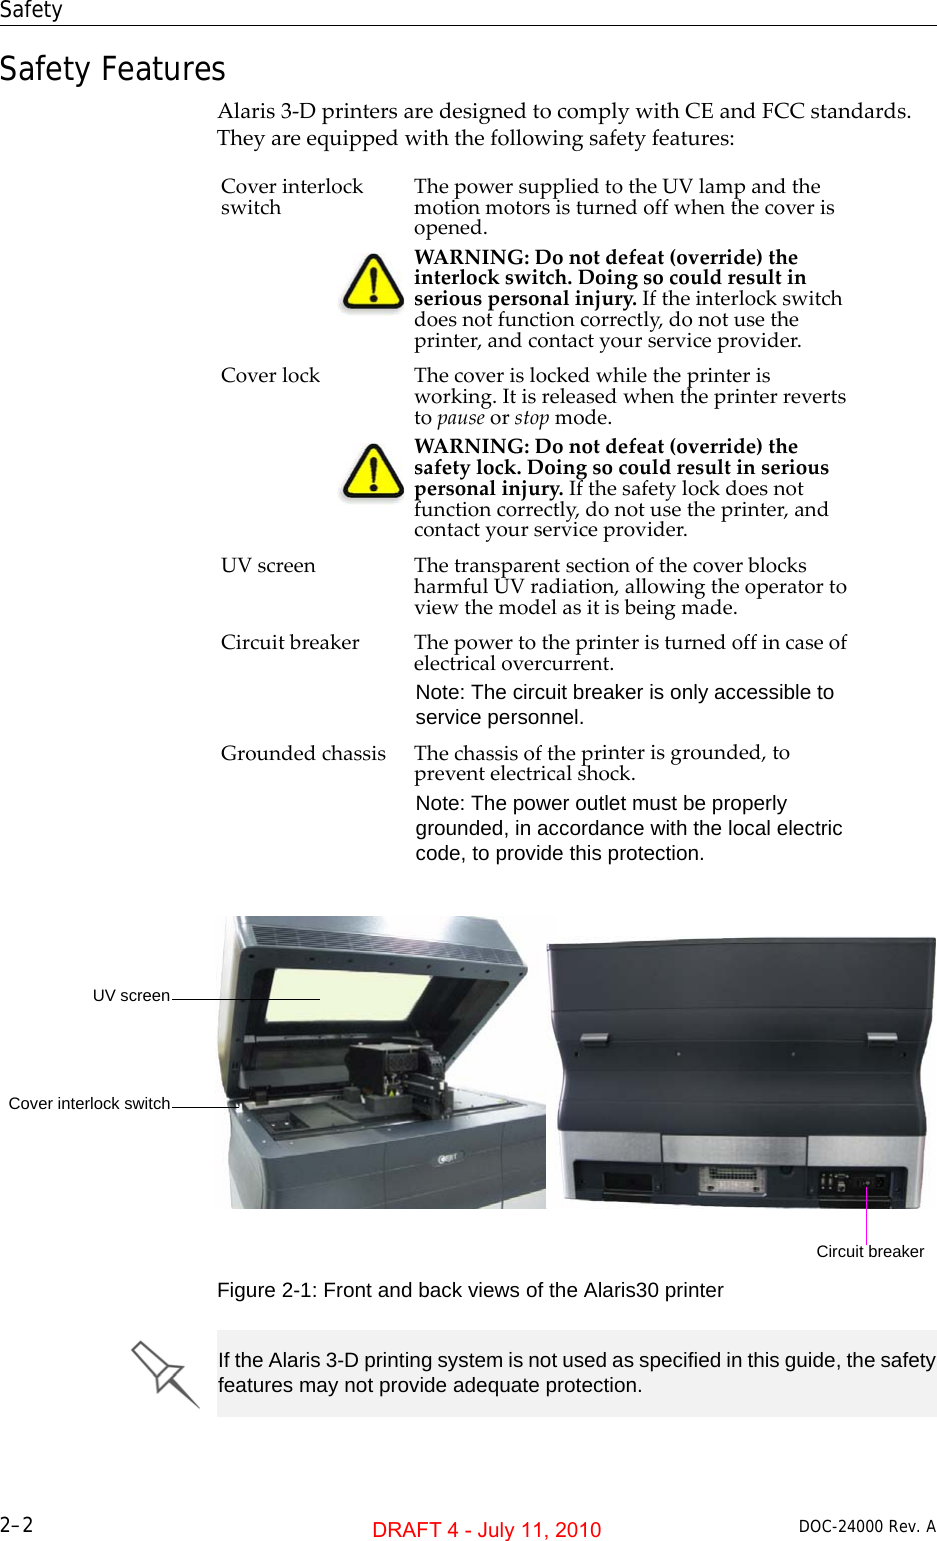 Safety2–2 DOC-24000 Rev. ASafety FeaturesAlaris3‐DprintersaredesignedtocomplywithCEandFCCstandards.Theyareequippedwiththefollowingsafetyfeatures:Figure 2-1: Front and back views of the Alaris30 printerCoverinterlockswitch ThepowersuppliedtotheUVlampandthemotionmotorsisturnedoffwhenthecoverisopened.WARNING:Donotdefeat(override)theinterlockswitch.Doingsocouldresultinseriouspersonalinjury.Iftheinterlockswitchdoesnotfunctioncorrectly,donotusetheprinter,andcontactyourserviceprovider.Coverlock Thecoverislockedwhiletheprinterisworking.Itisreleasedwhentheprinterrevertstopauseorstopmode.WARNING:Donotdefeat(override)thesafetylock.Doingsocouldresultinseriouspersonalinjury.Ifthesafetylockdoesnotfunctioncorrectly,donotusetheprinter,andcontactyourserviceprovider.UVscreenThetransparentsectionofthecoverblocksharmfulUVradiation,allowingtheoperatortoviewthemodelasitisbeingmade.Circuitbreaker Thepowertotheprinteristurnedoffincaseofelectricalovercurrent.Note: The circuit breaker is only accessible to service personnel.Groundedchassis Thechassisoftheprinterisgrounded,topreventelectricalshock.Note: The power outlet must be properly grounded, in accordance with the local electric code, to provide this protection.UV screenCover interlock switchCircuit breakerIf the Alaris 3-D printing system is not used as specified in this guide, the safety features may not provide adequate protection.DRAFT 4 - July 11, 2010